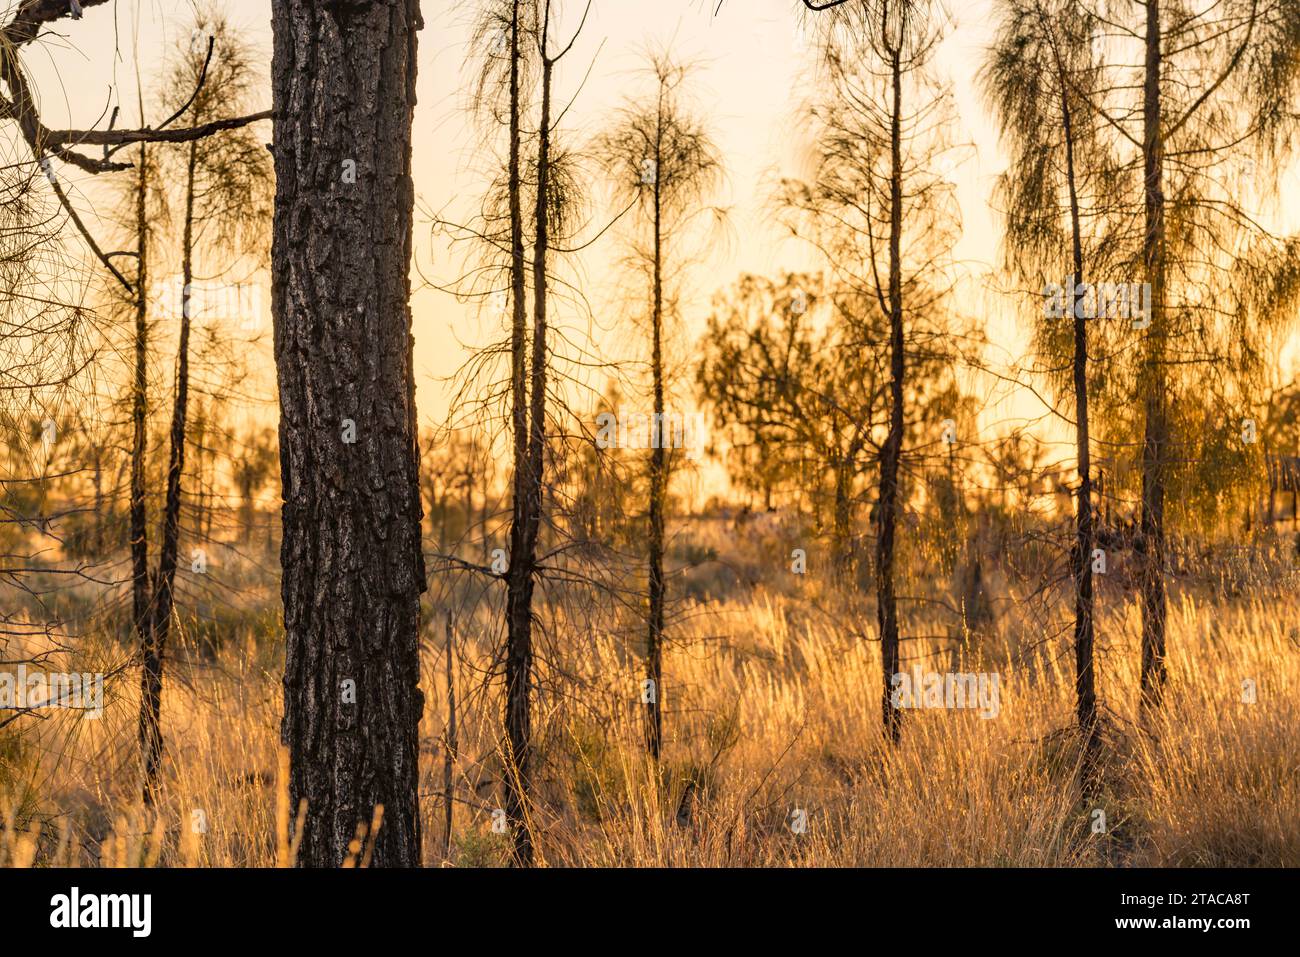 A generic image of spinifex and desert Oak trees in golden morning sunlight in Central Australia near Kata Tjuta Stock Photo